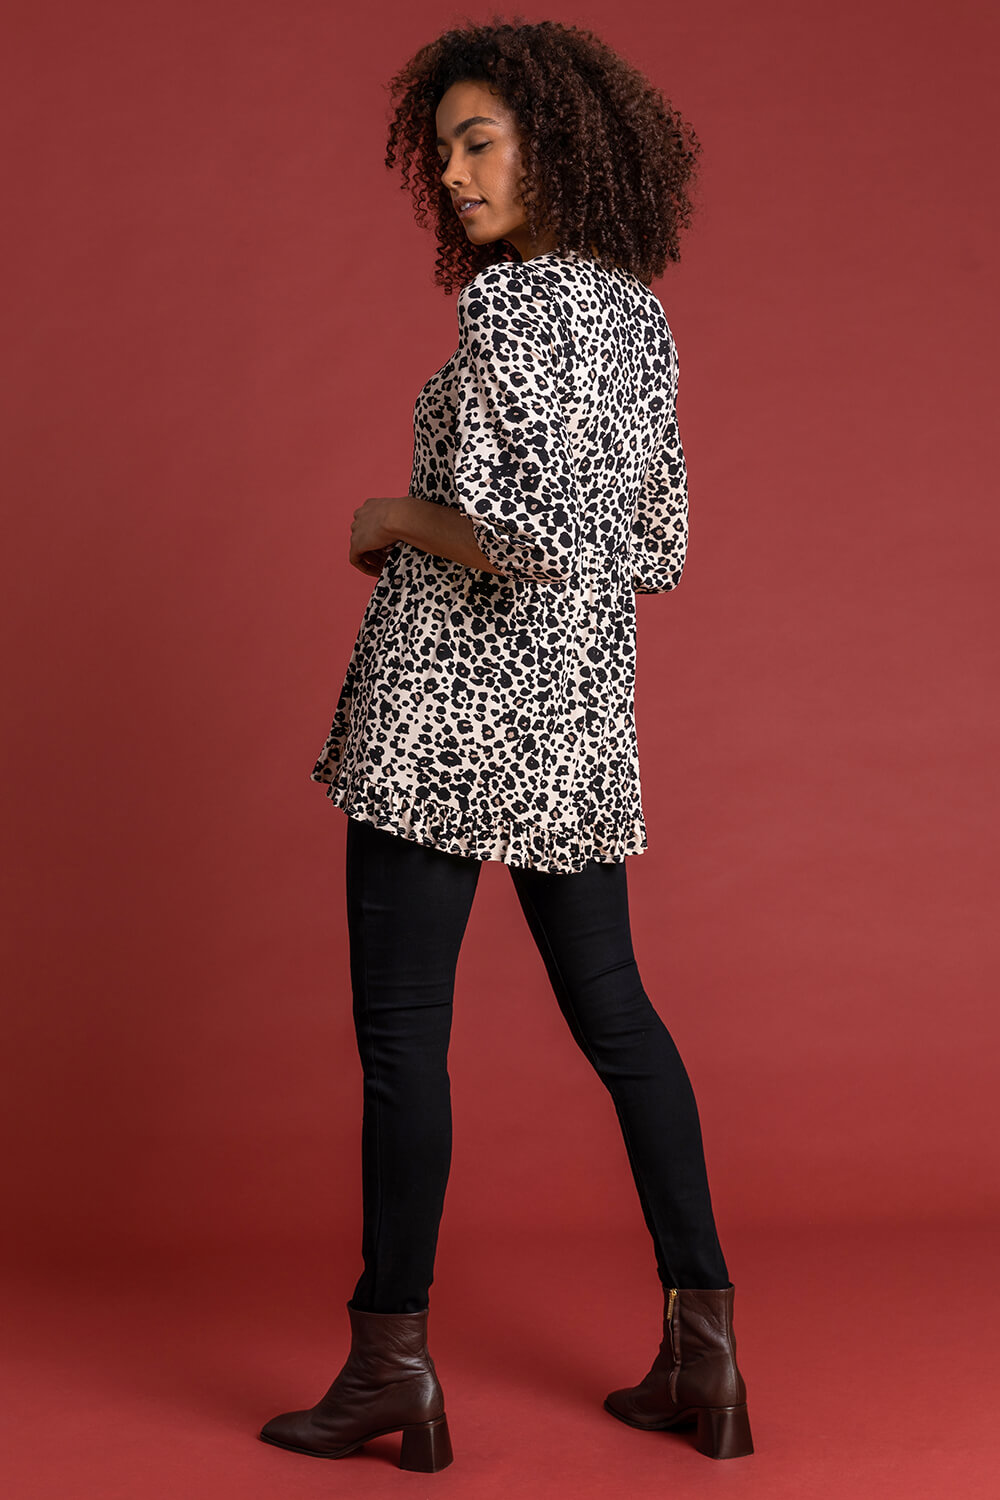 Taupe Leopard Print 3/4 Sleeve Frill Trim Smock Top, Image 2 of 4